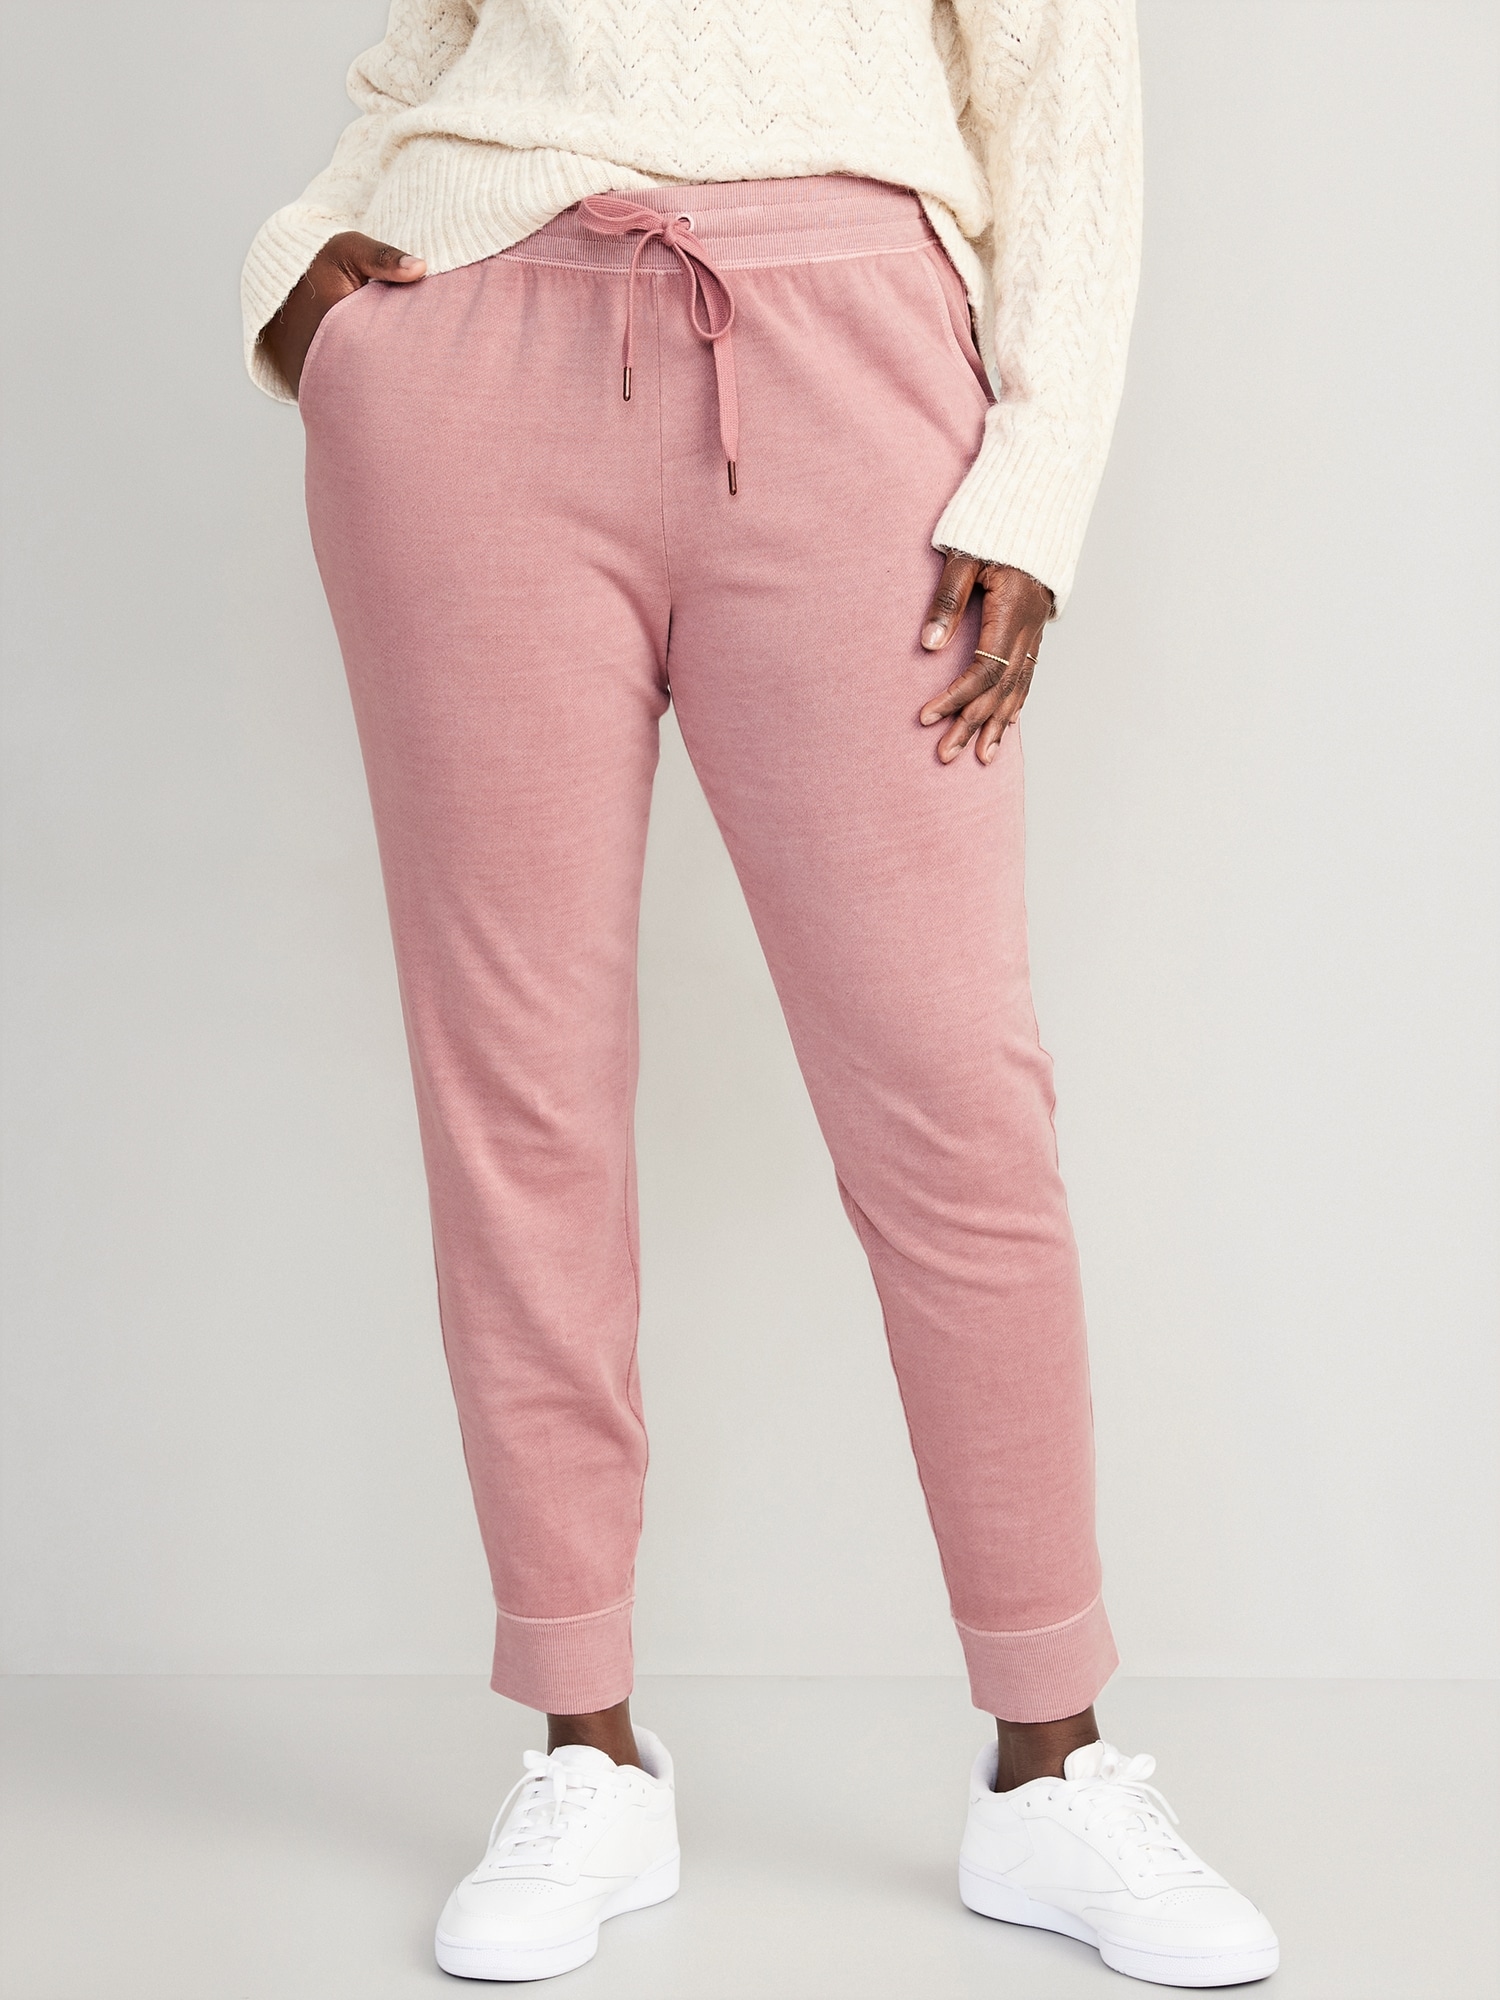 Mid Rise Vintage Street Jogger Sweatpants For Women Old Navy